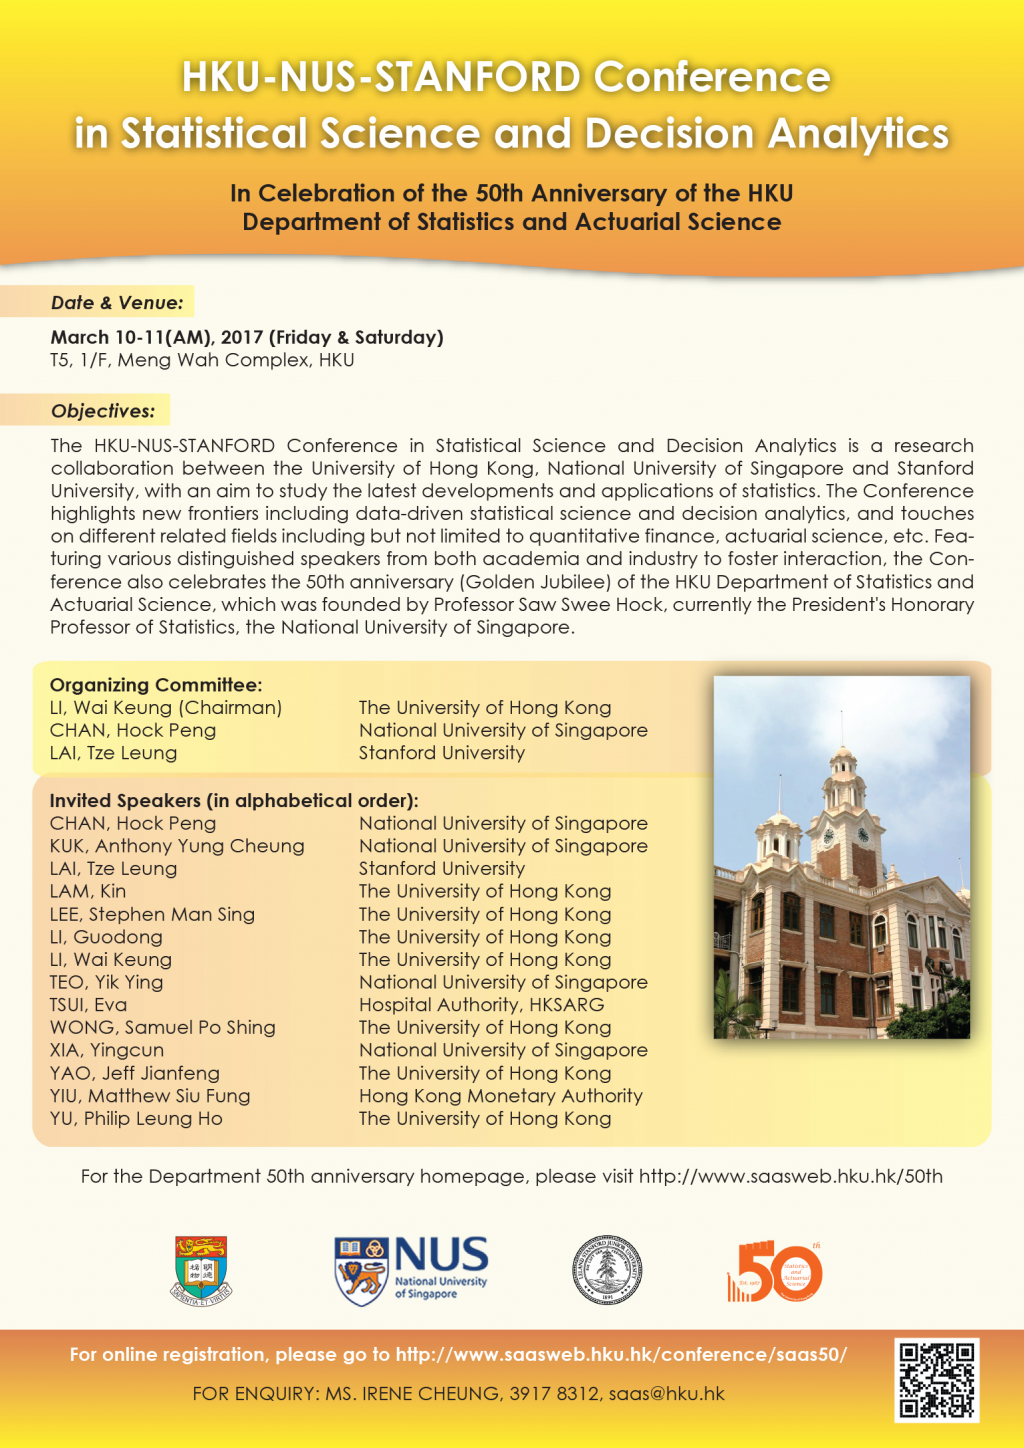 HKU-NUS-STANFORD Conference in Statistical Science and Decision Analytics on March 10-11(AM), 2017